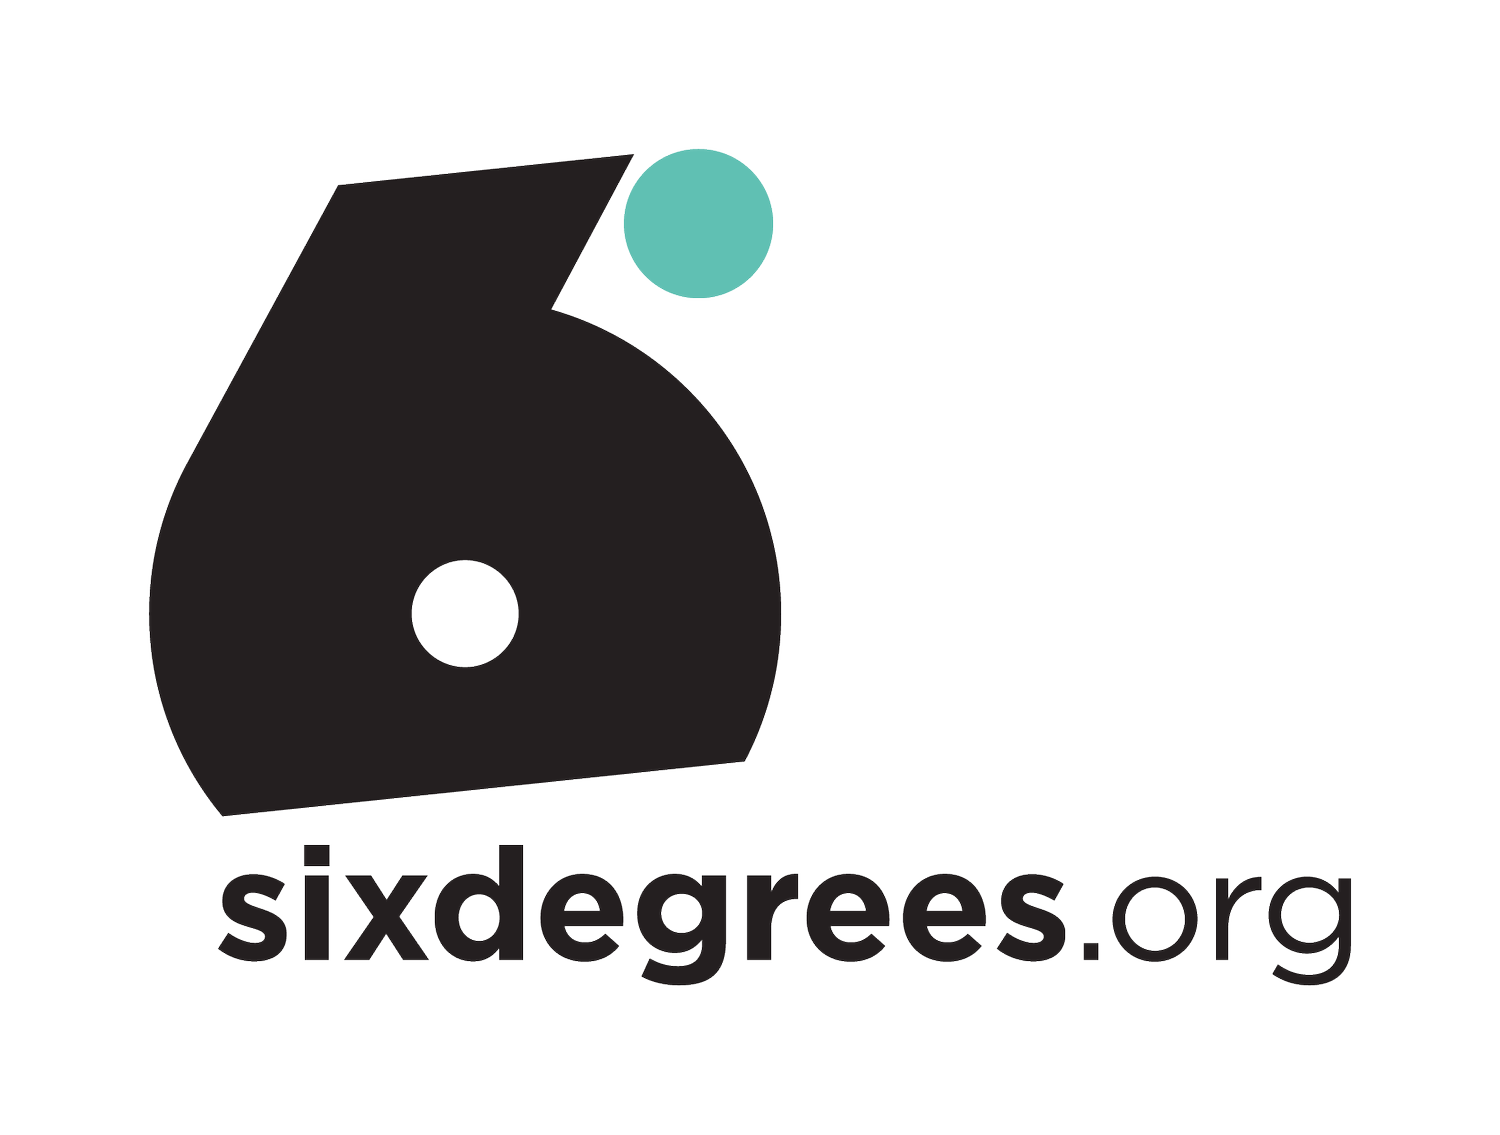 sixdegrees.org